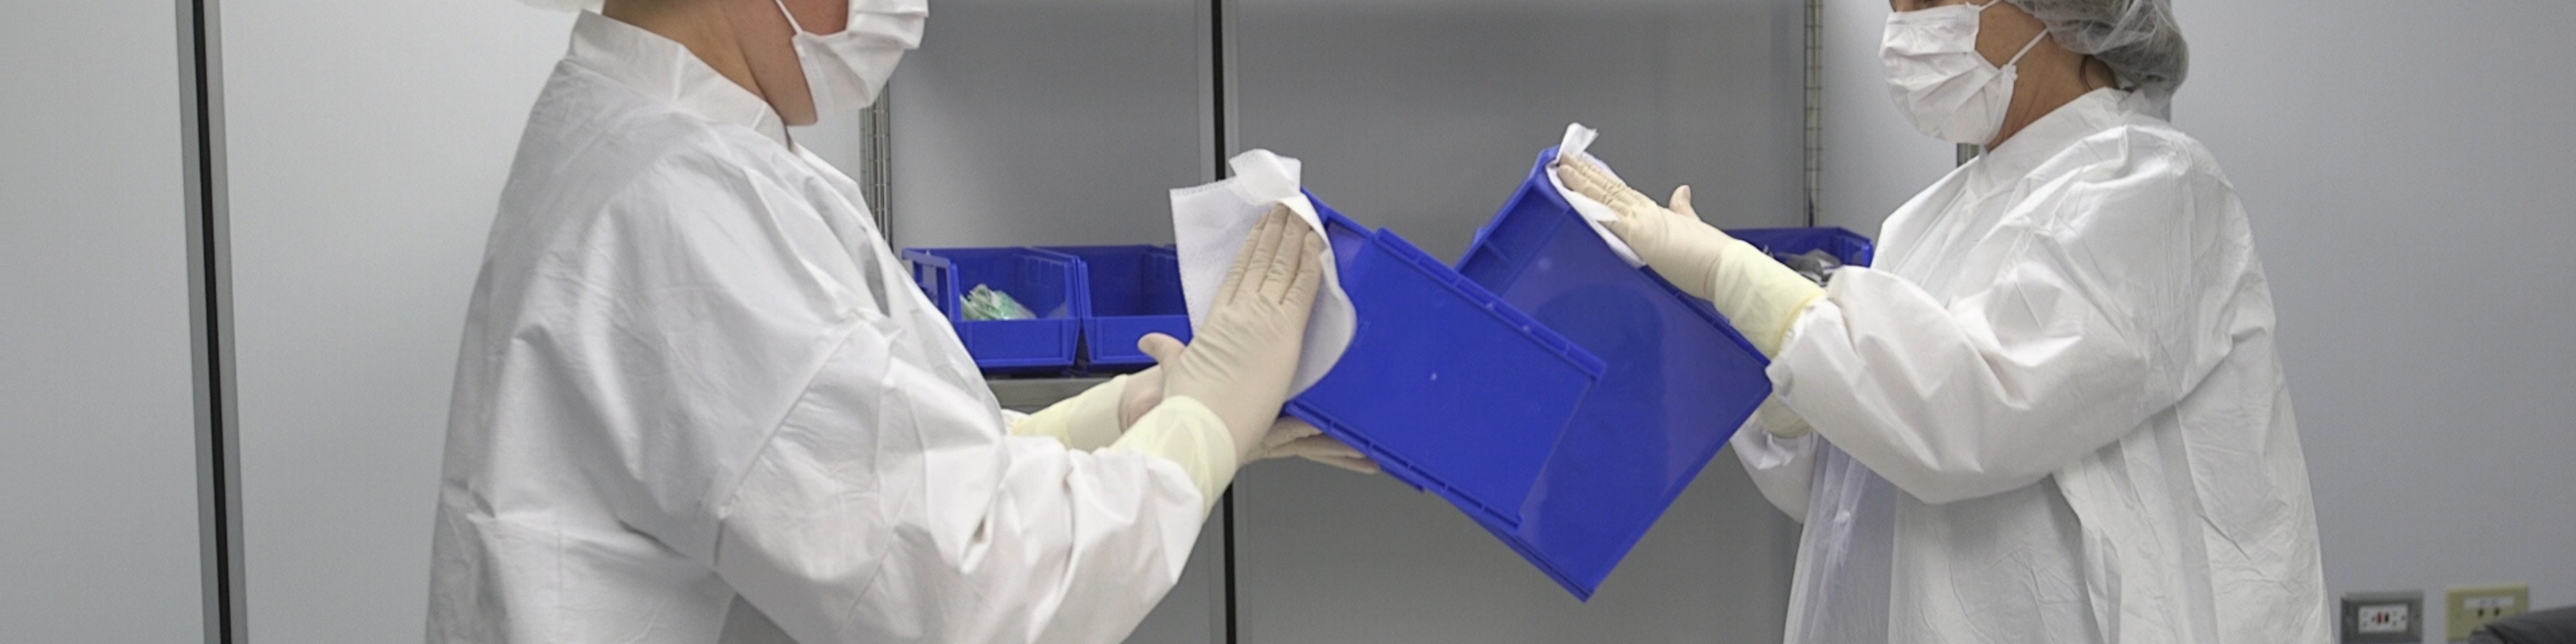 Pharmacist cleaning the sterile compounding bins